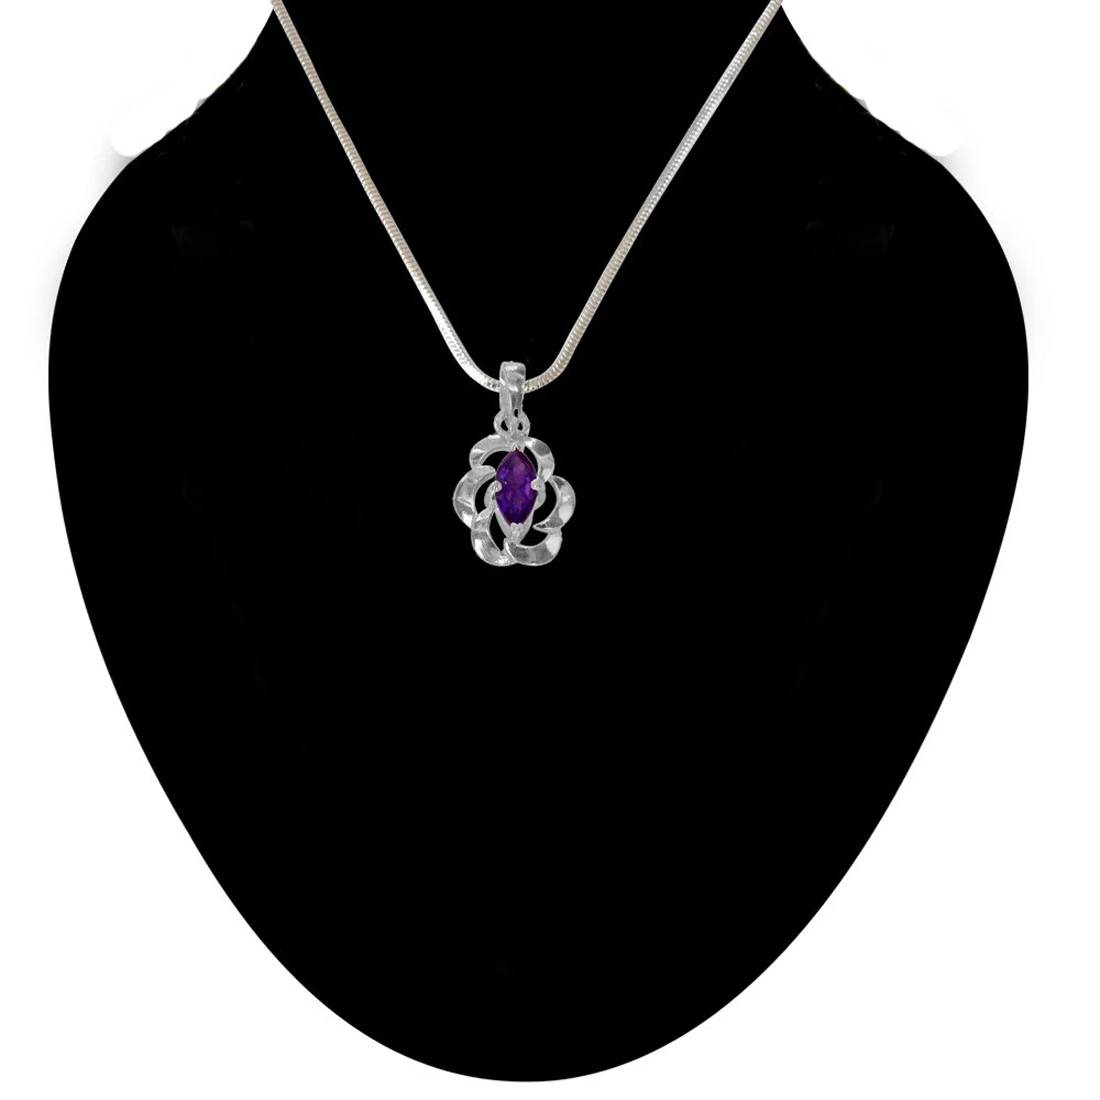 Marquise Shape Purple Amethsyt & Sterling Silver Pendant with Silver Finished Chain for Girls (SDS148)